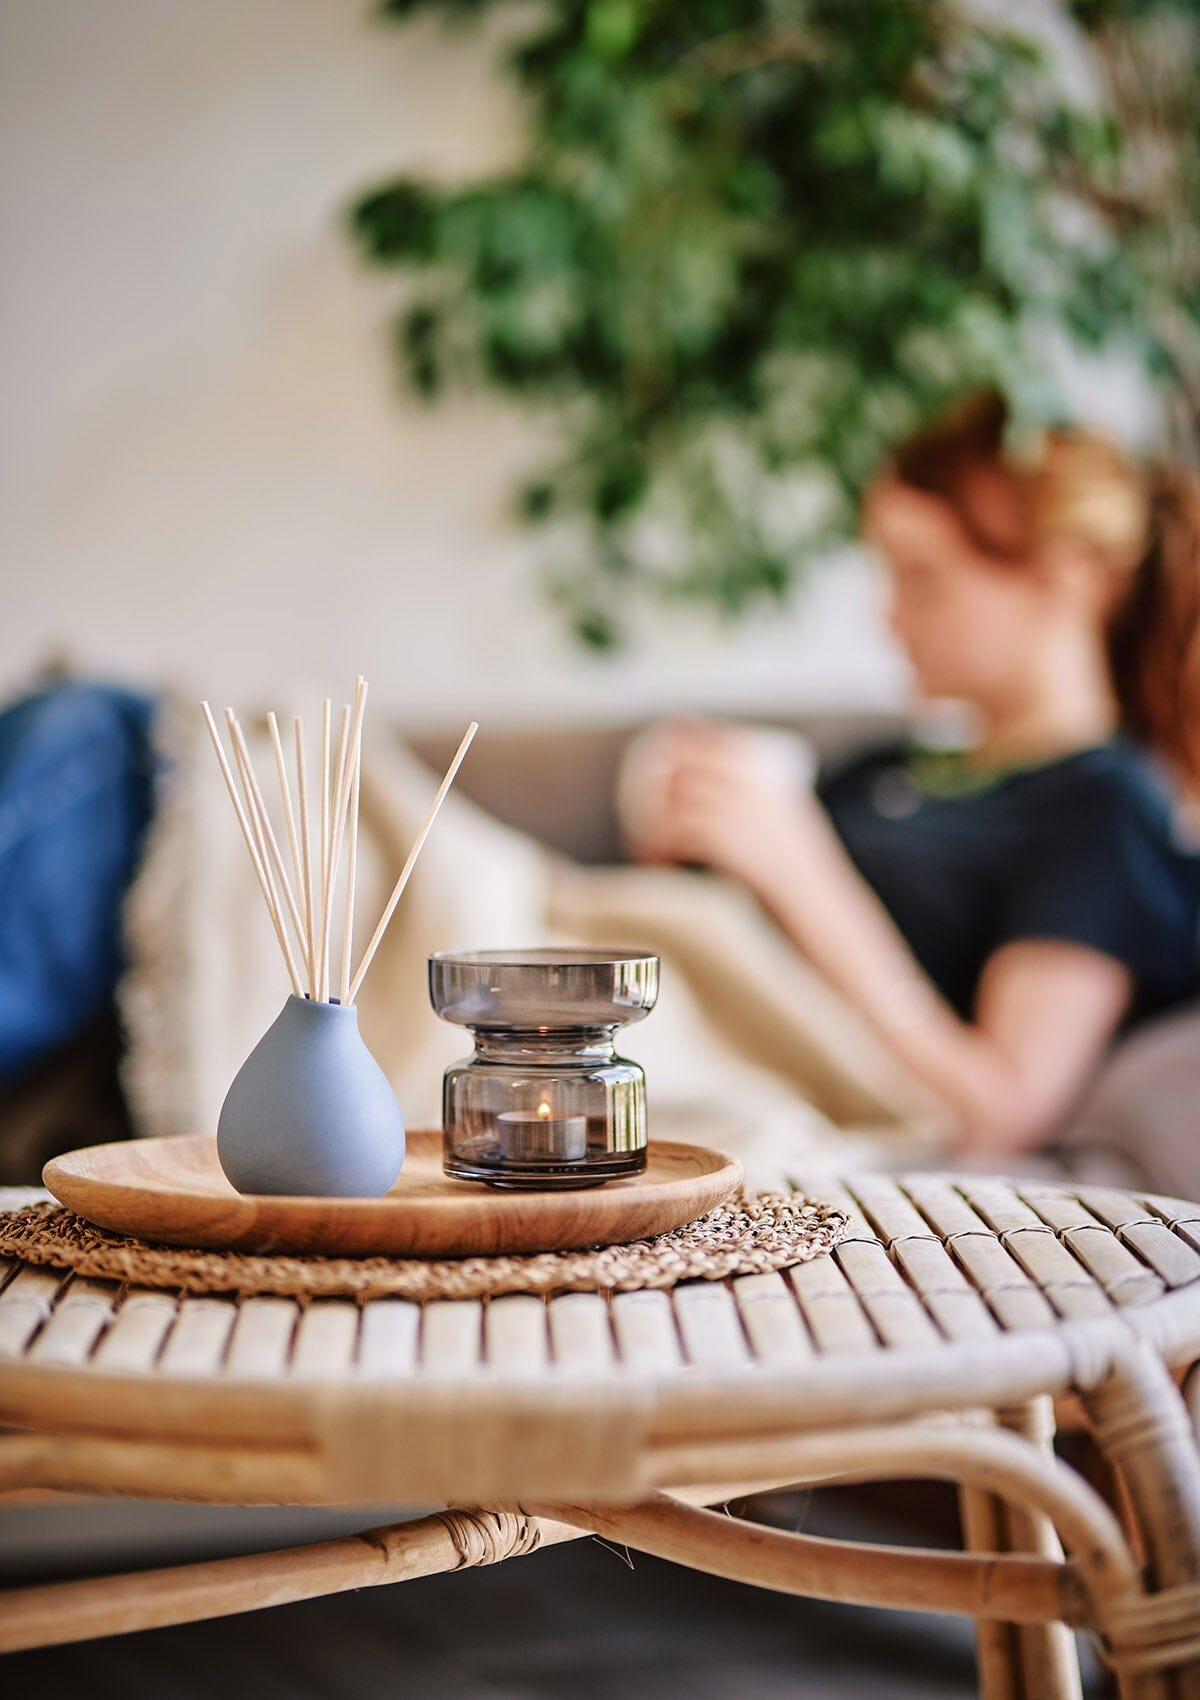 Blue Japanese Garden diffuser by Aery displayed next to black tea light holder on round wooden table in kitchen 